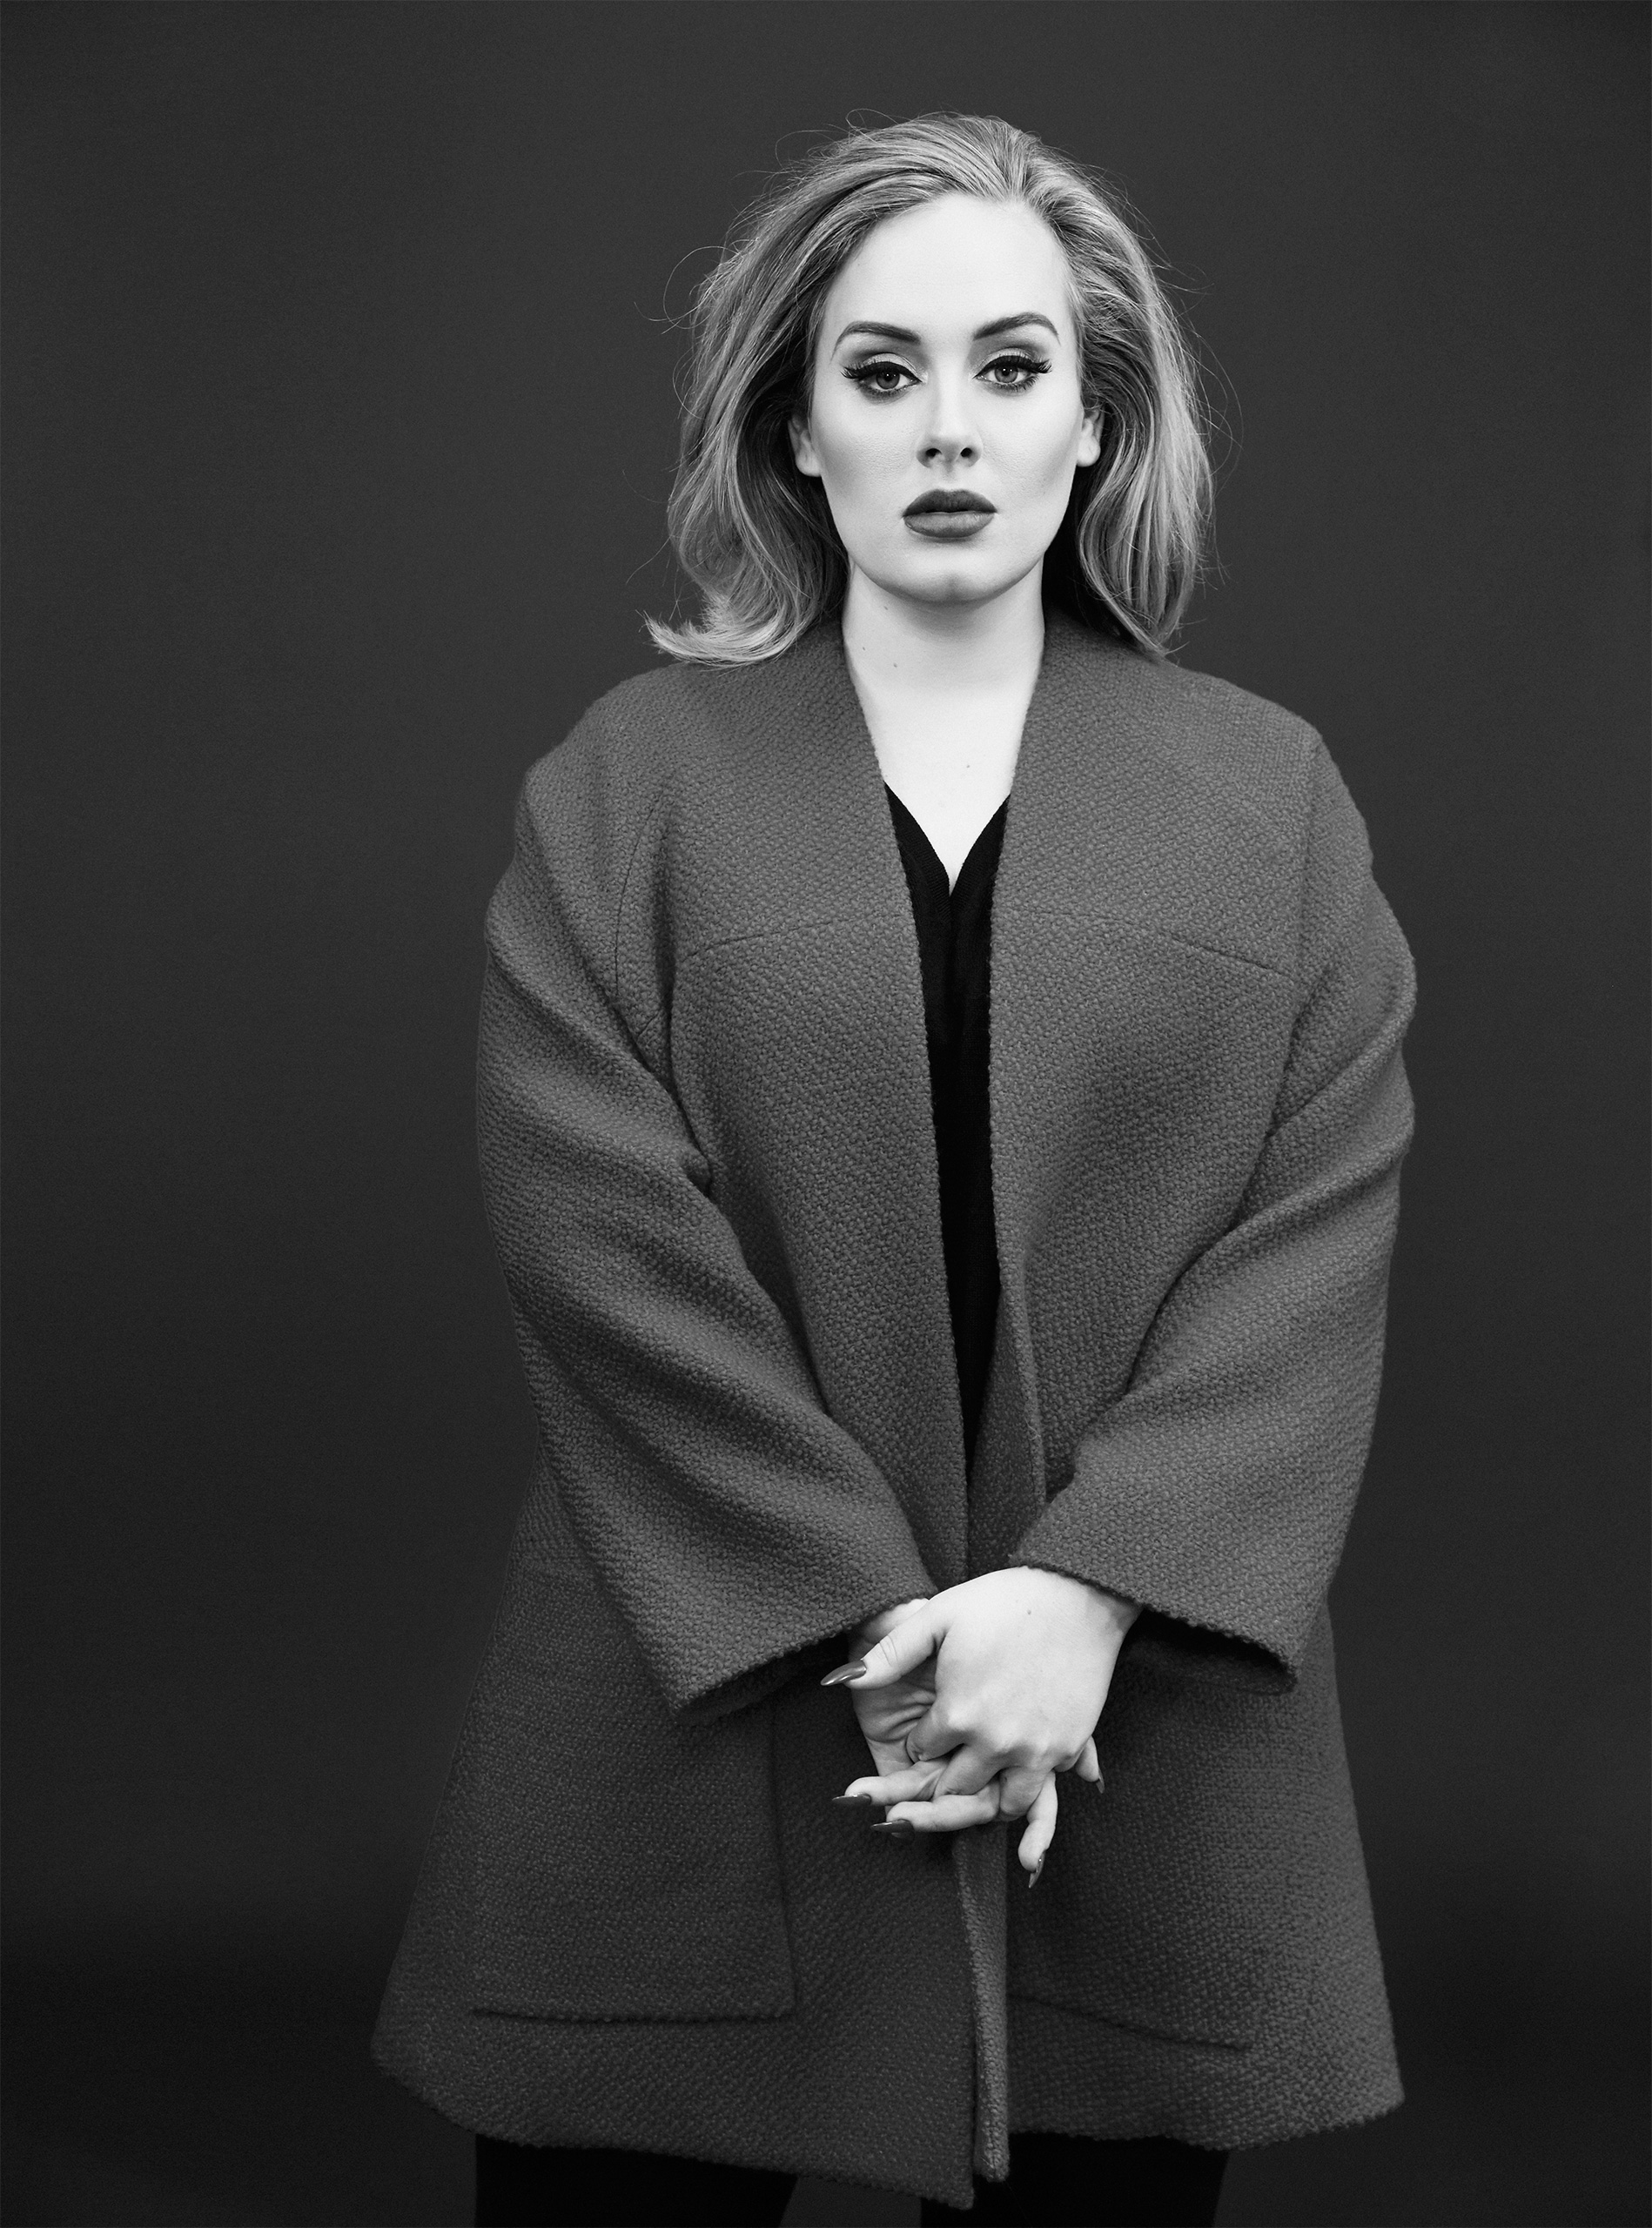 British singer Adele is photographed in New York City on Nov. 19, 2015.